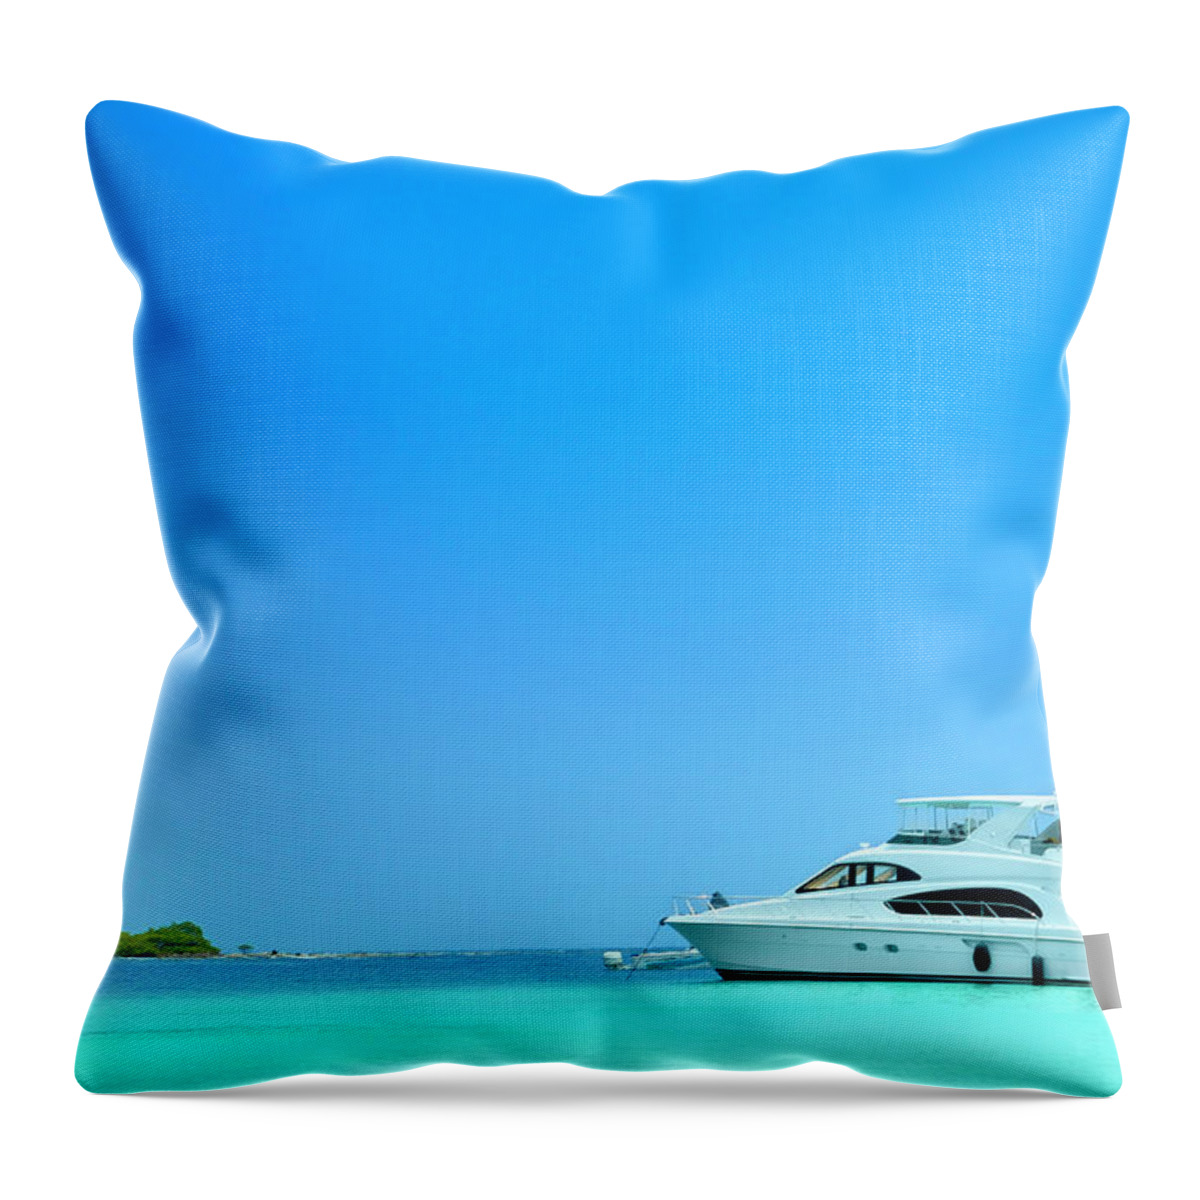 Water's Edge Throw Pillow featuring the photograph Luxury Yachts Sailing In A Tropical by Apomares